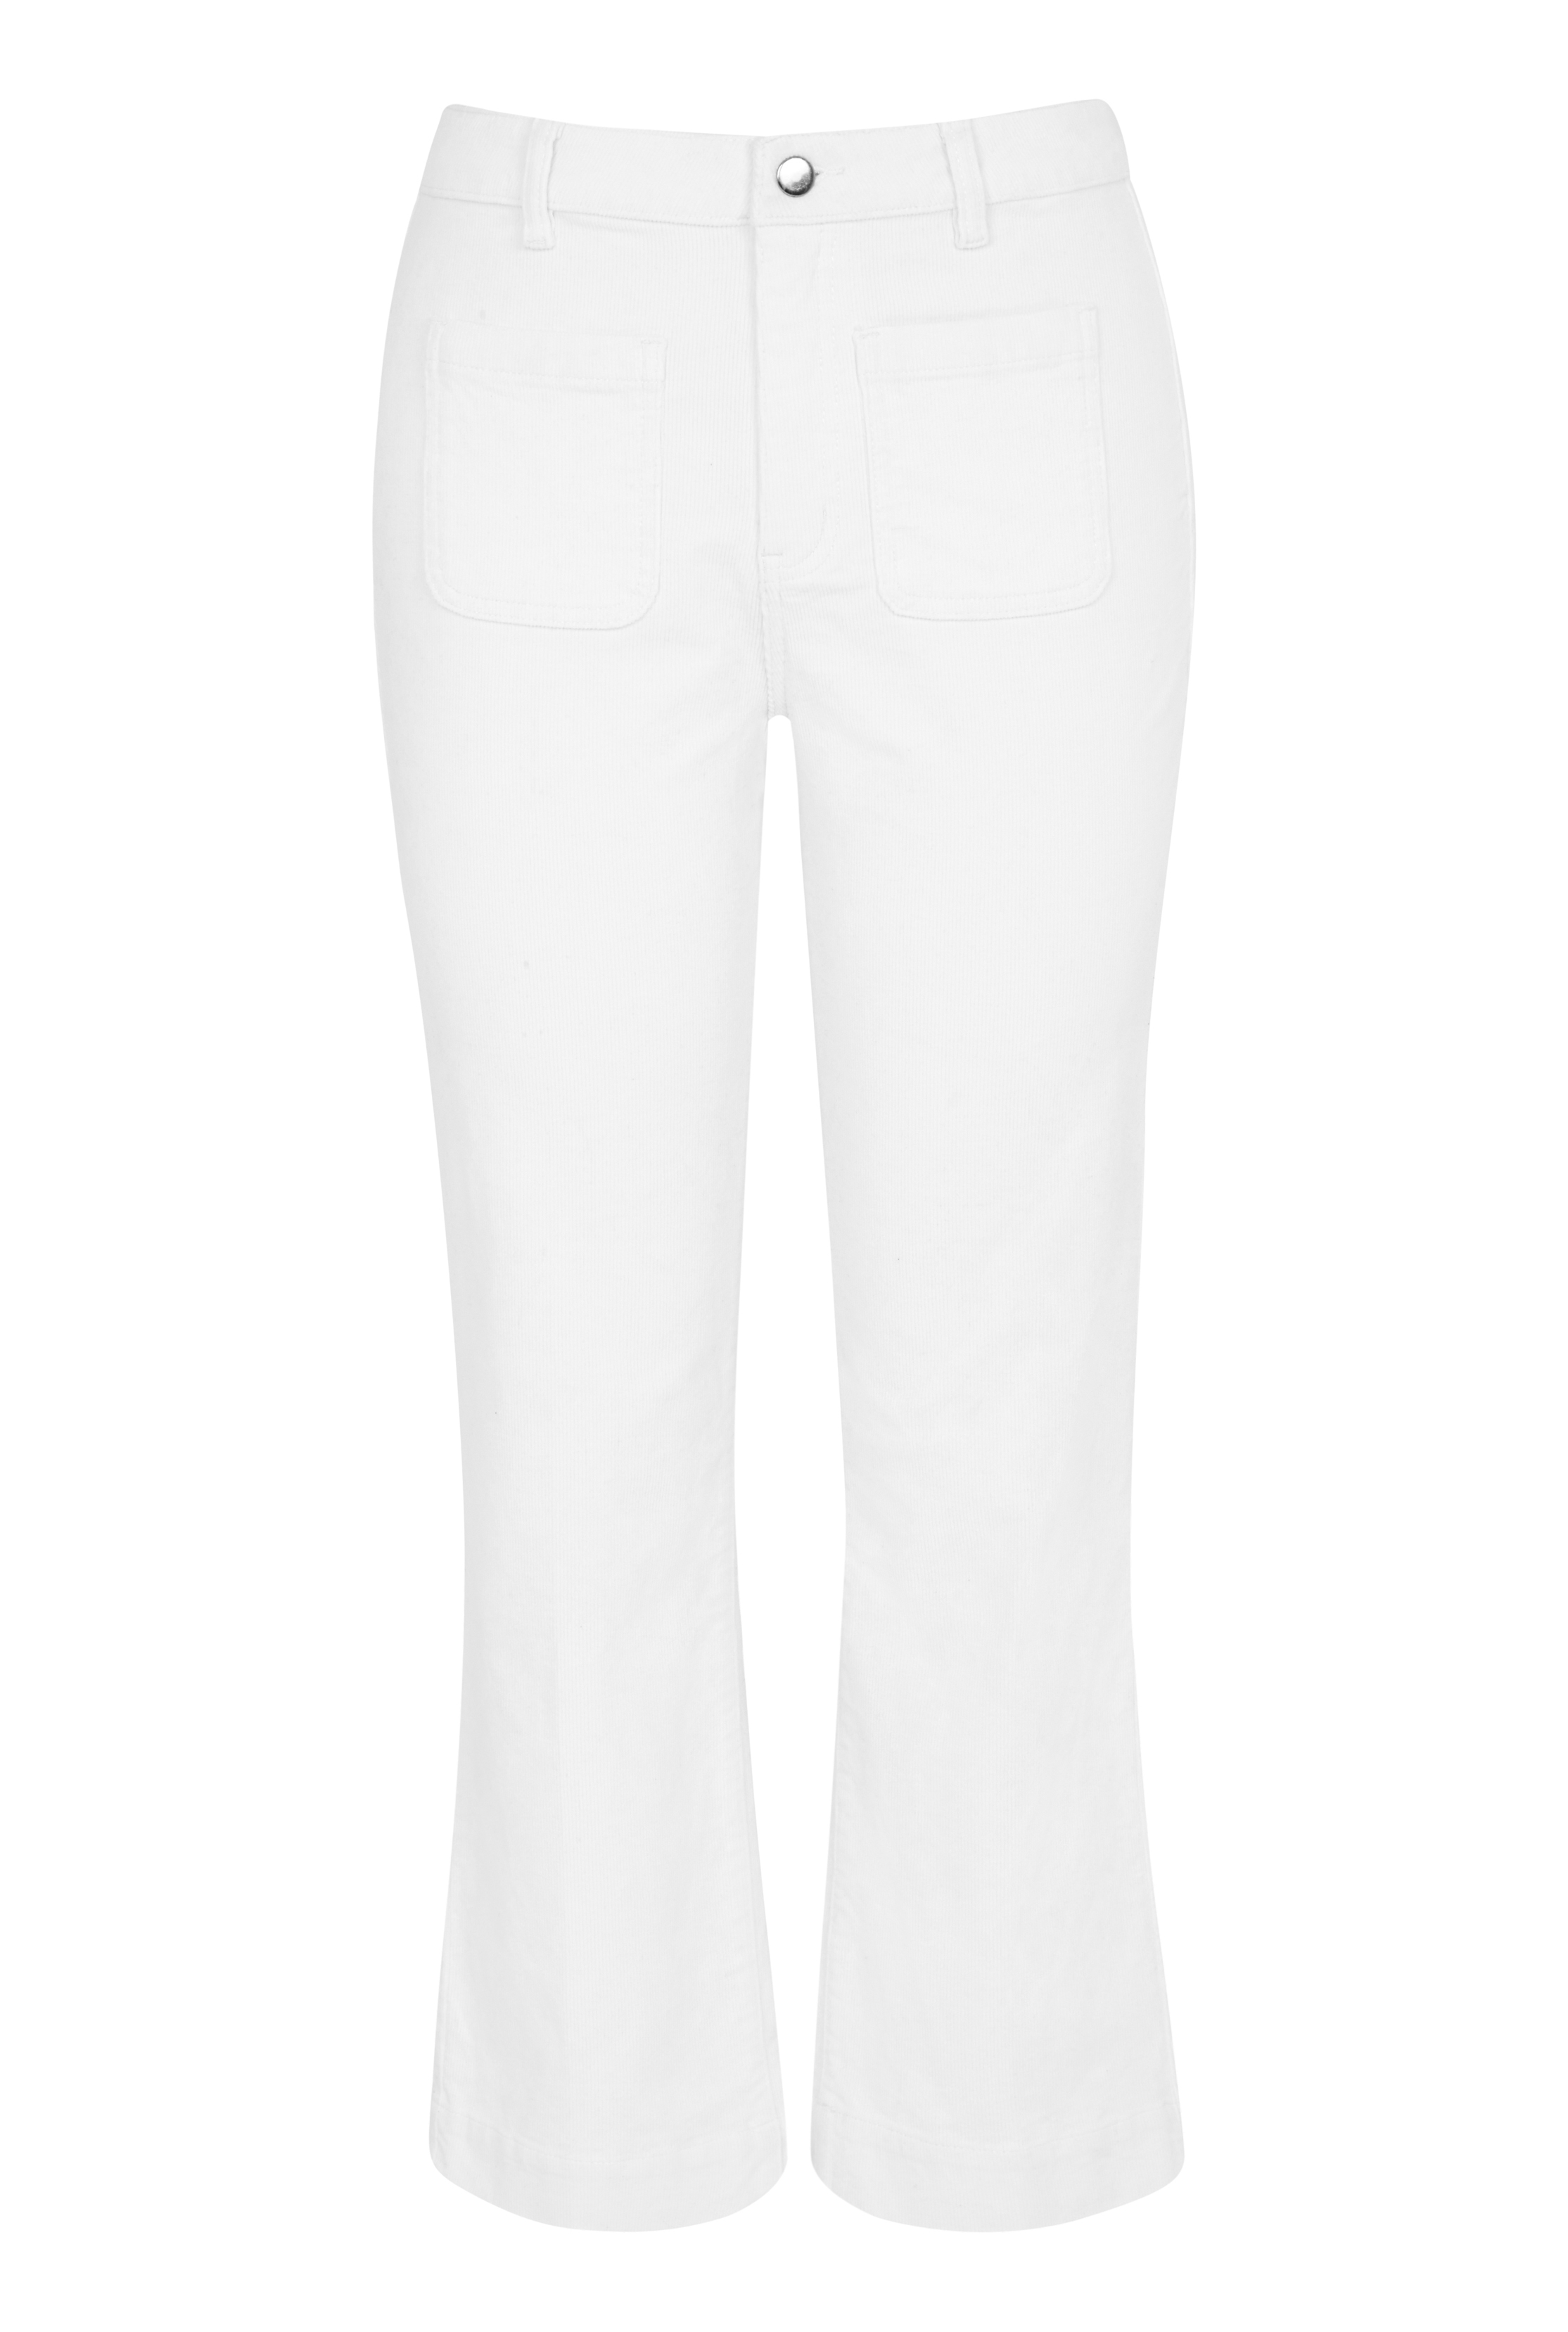 Cream Cord Flare Ankle Length Trousers | Long Tall Sally